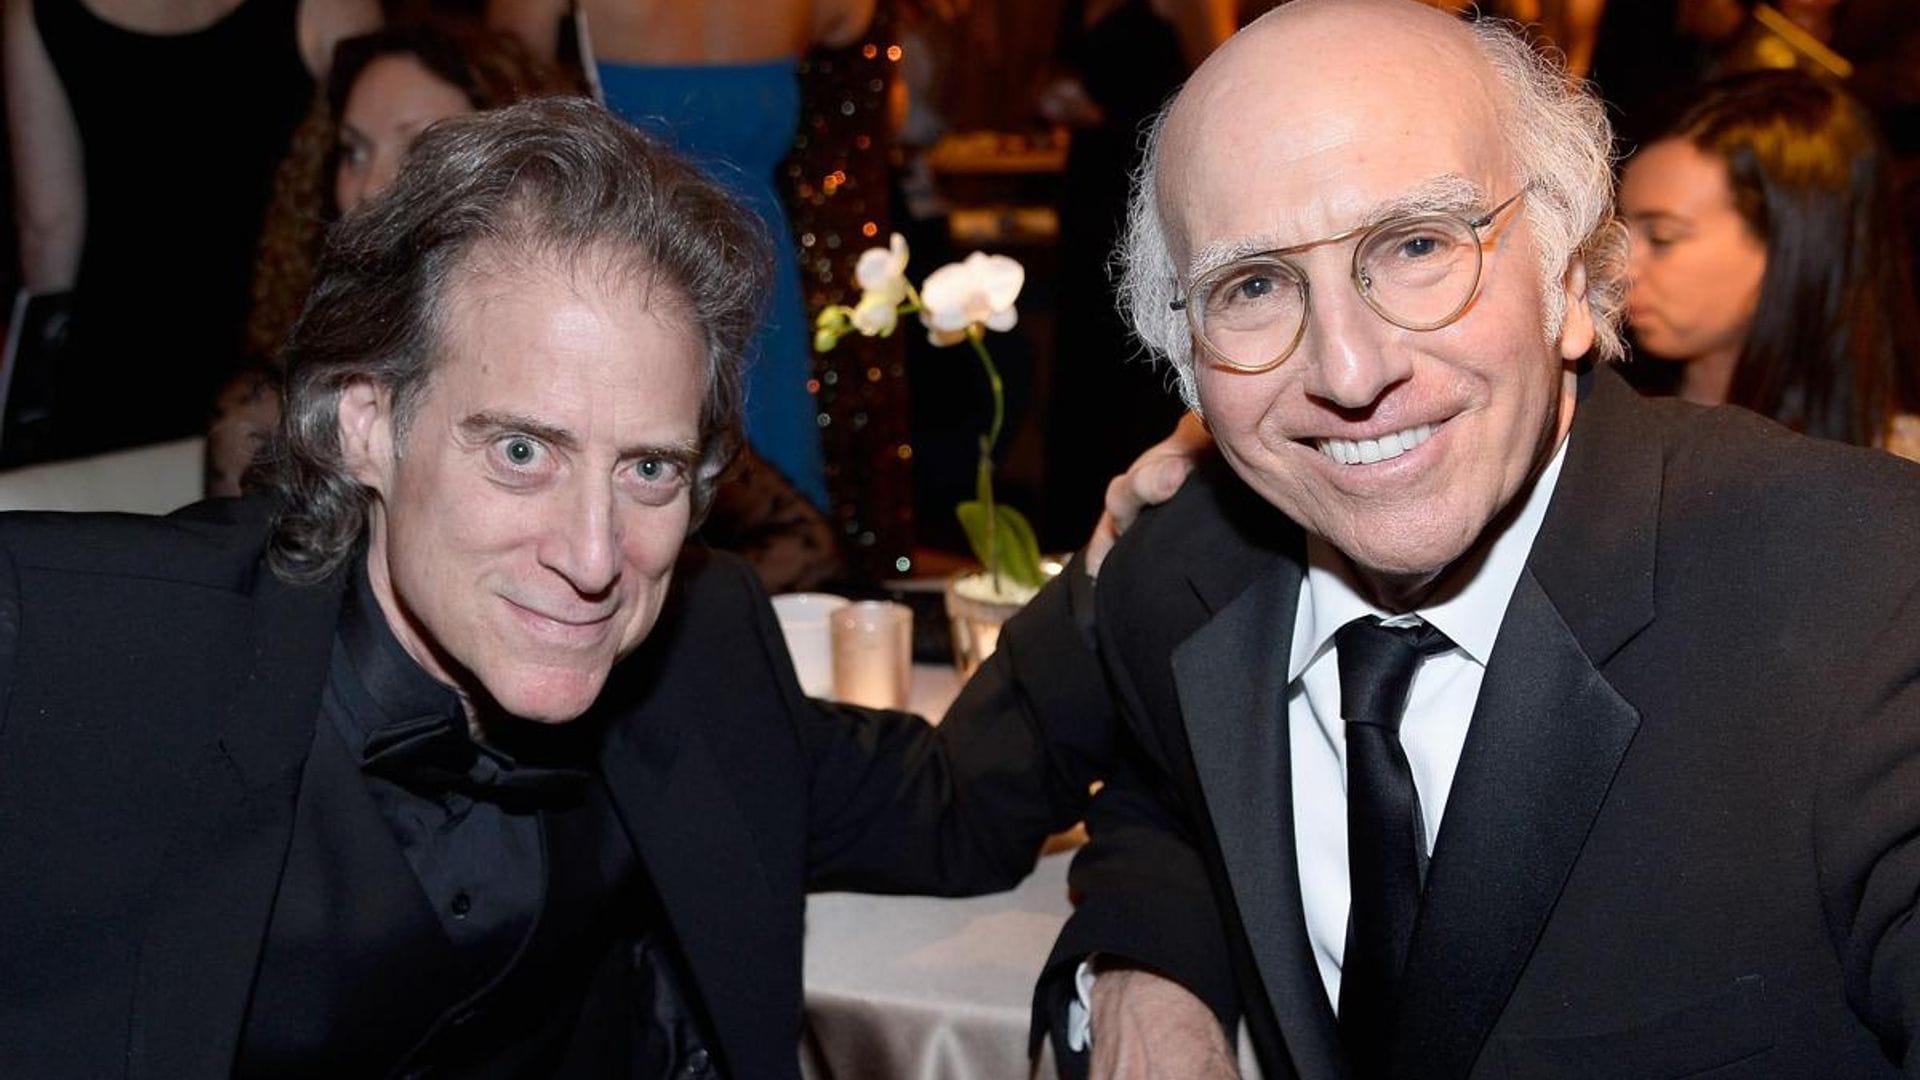 Larry David and more stars react to the death of Richard Lewis